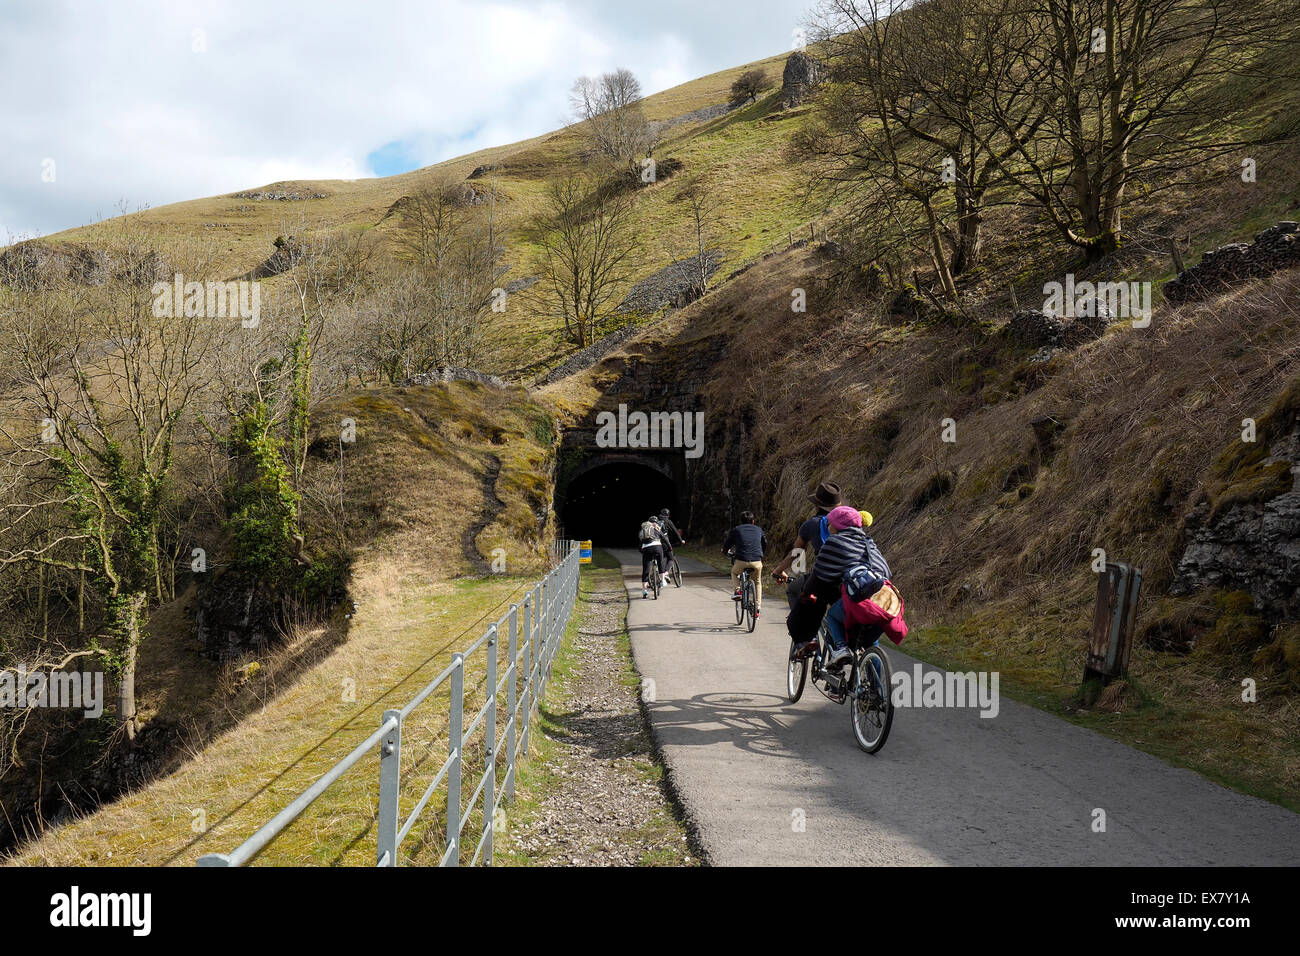 Monsal Trail in Derbyshire Peak District a popular cycling walking trail on disused rail line England Stock Photo